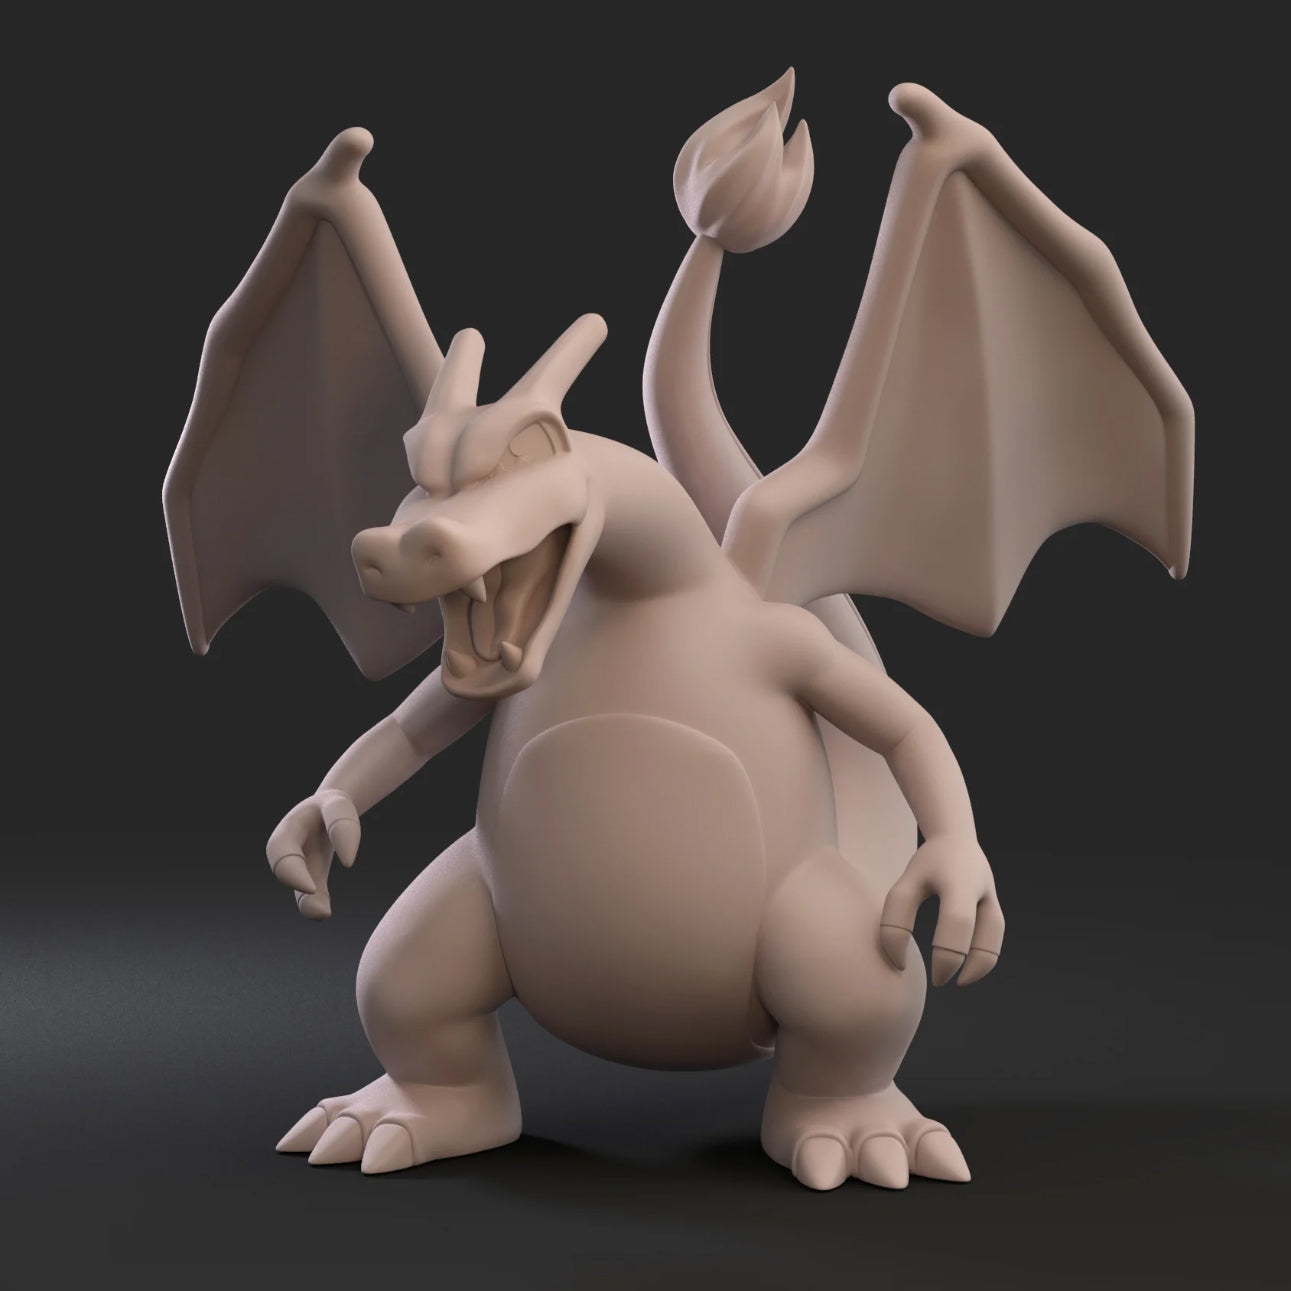 ZBrush Sculpting Stylized Characters for Toys and Collectibles